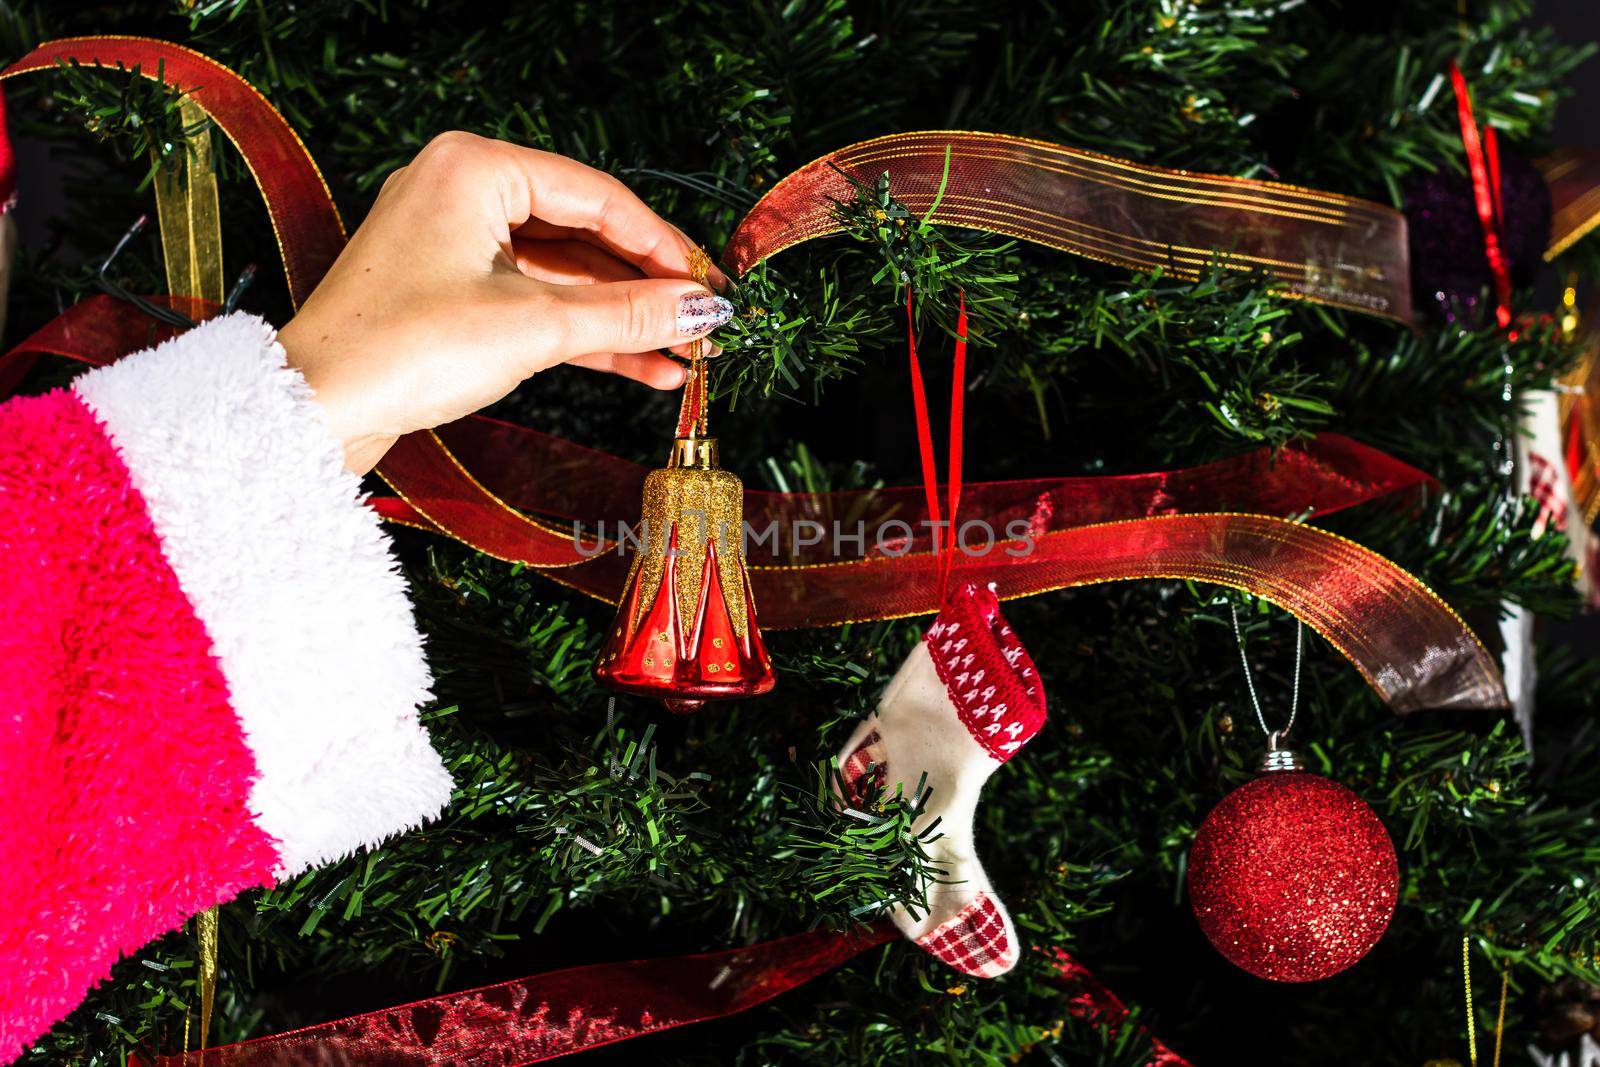 Decorating Christmas tree, hand putting Christmas decorations on fir branches. Christmas hanging decorations.